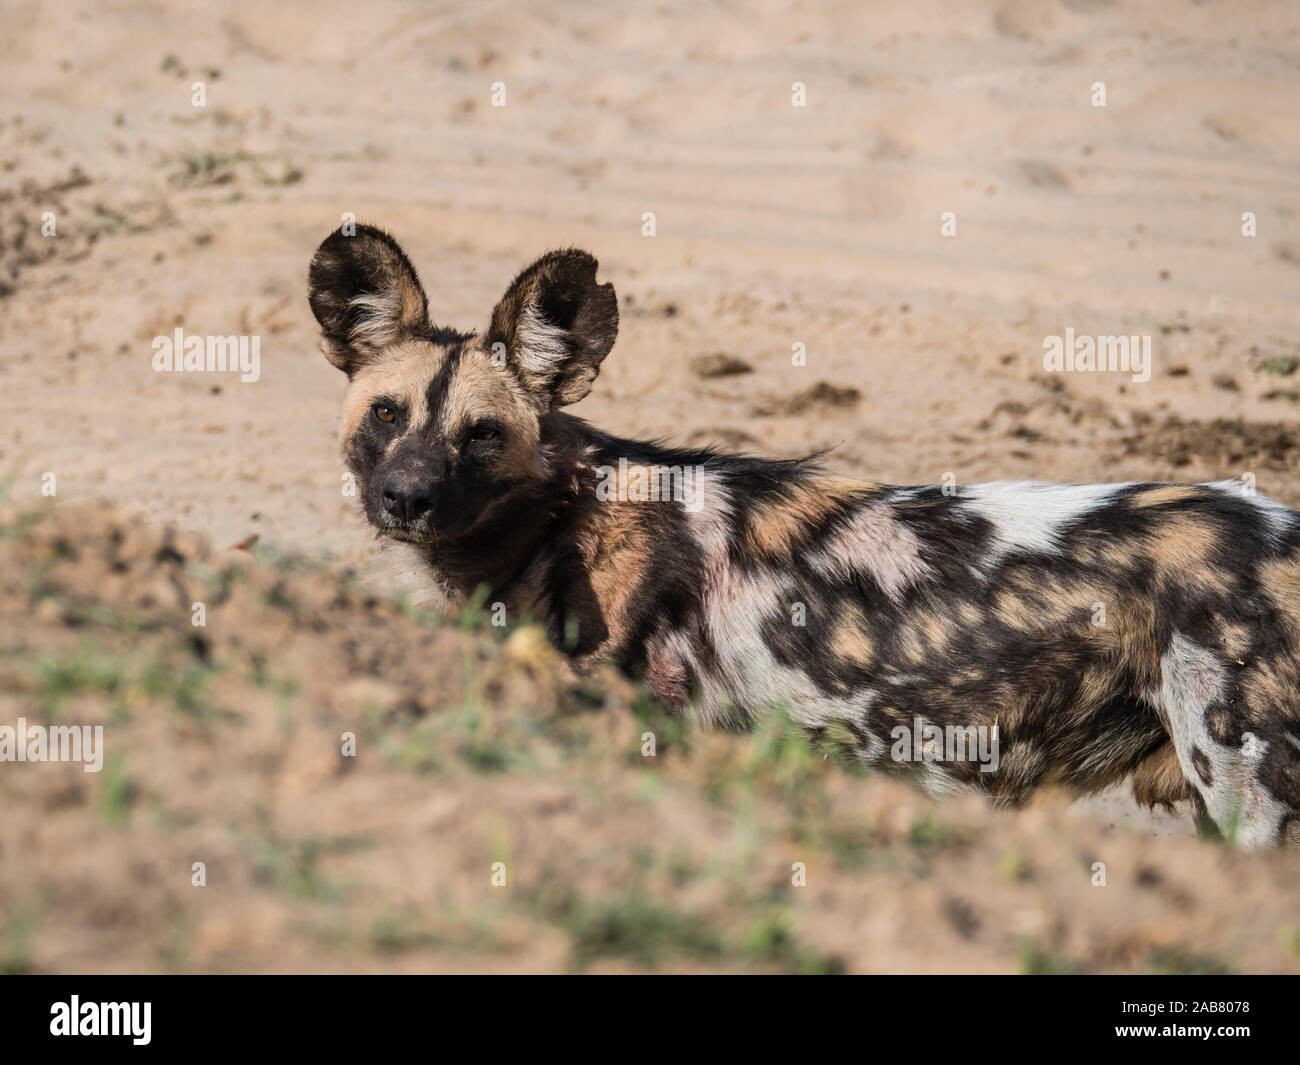 A Cape wild dog (Lycaon pictus pictus), listed as Endangered, South Luangwa National Park, Zambia, Africa Stock Photo